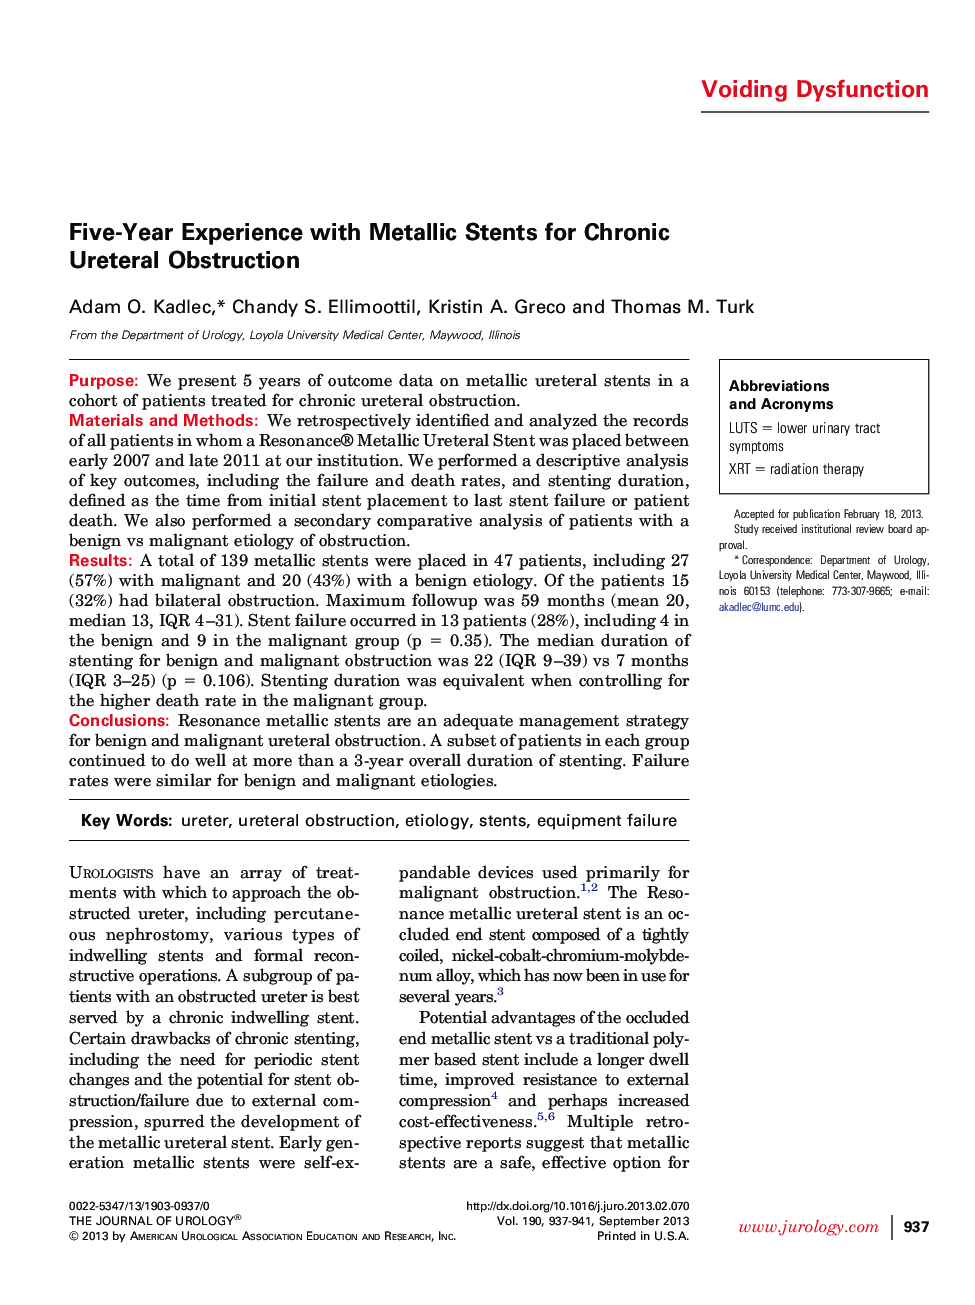 Five-Year Experience with Metallic Stents for Chronic Ureteral Obstruction